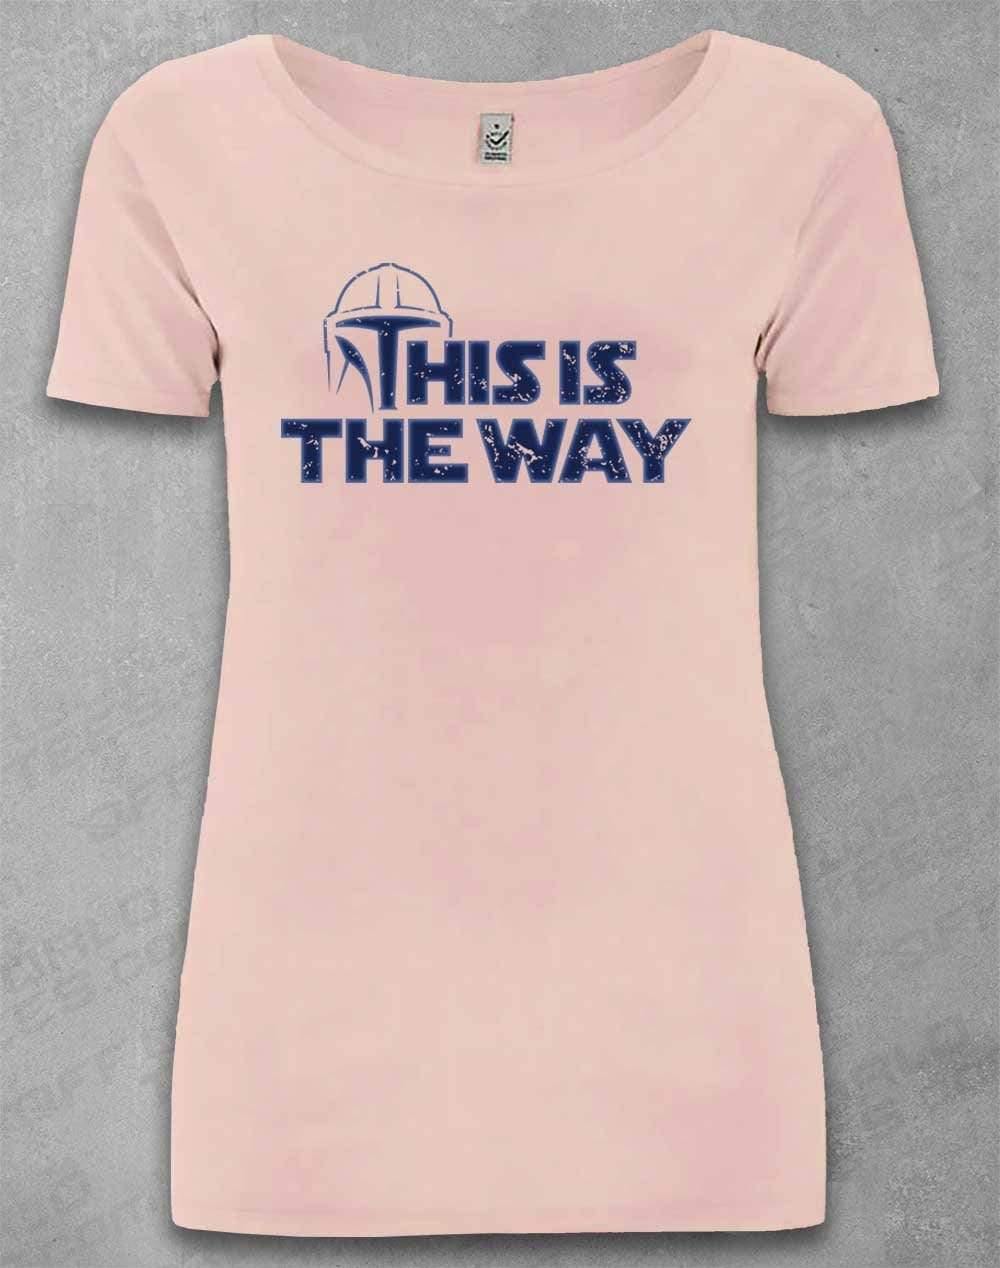 DELUXE This is the Way - Organic Scoop Neck T-Shirt 10-12 / Light Pink  - Off World Tees